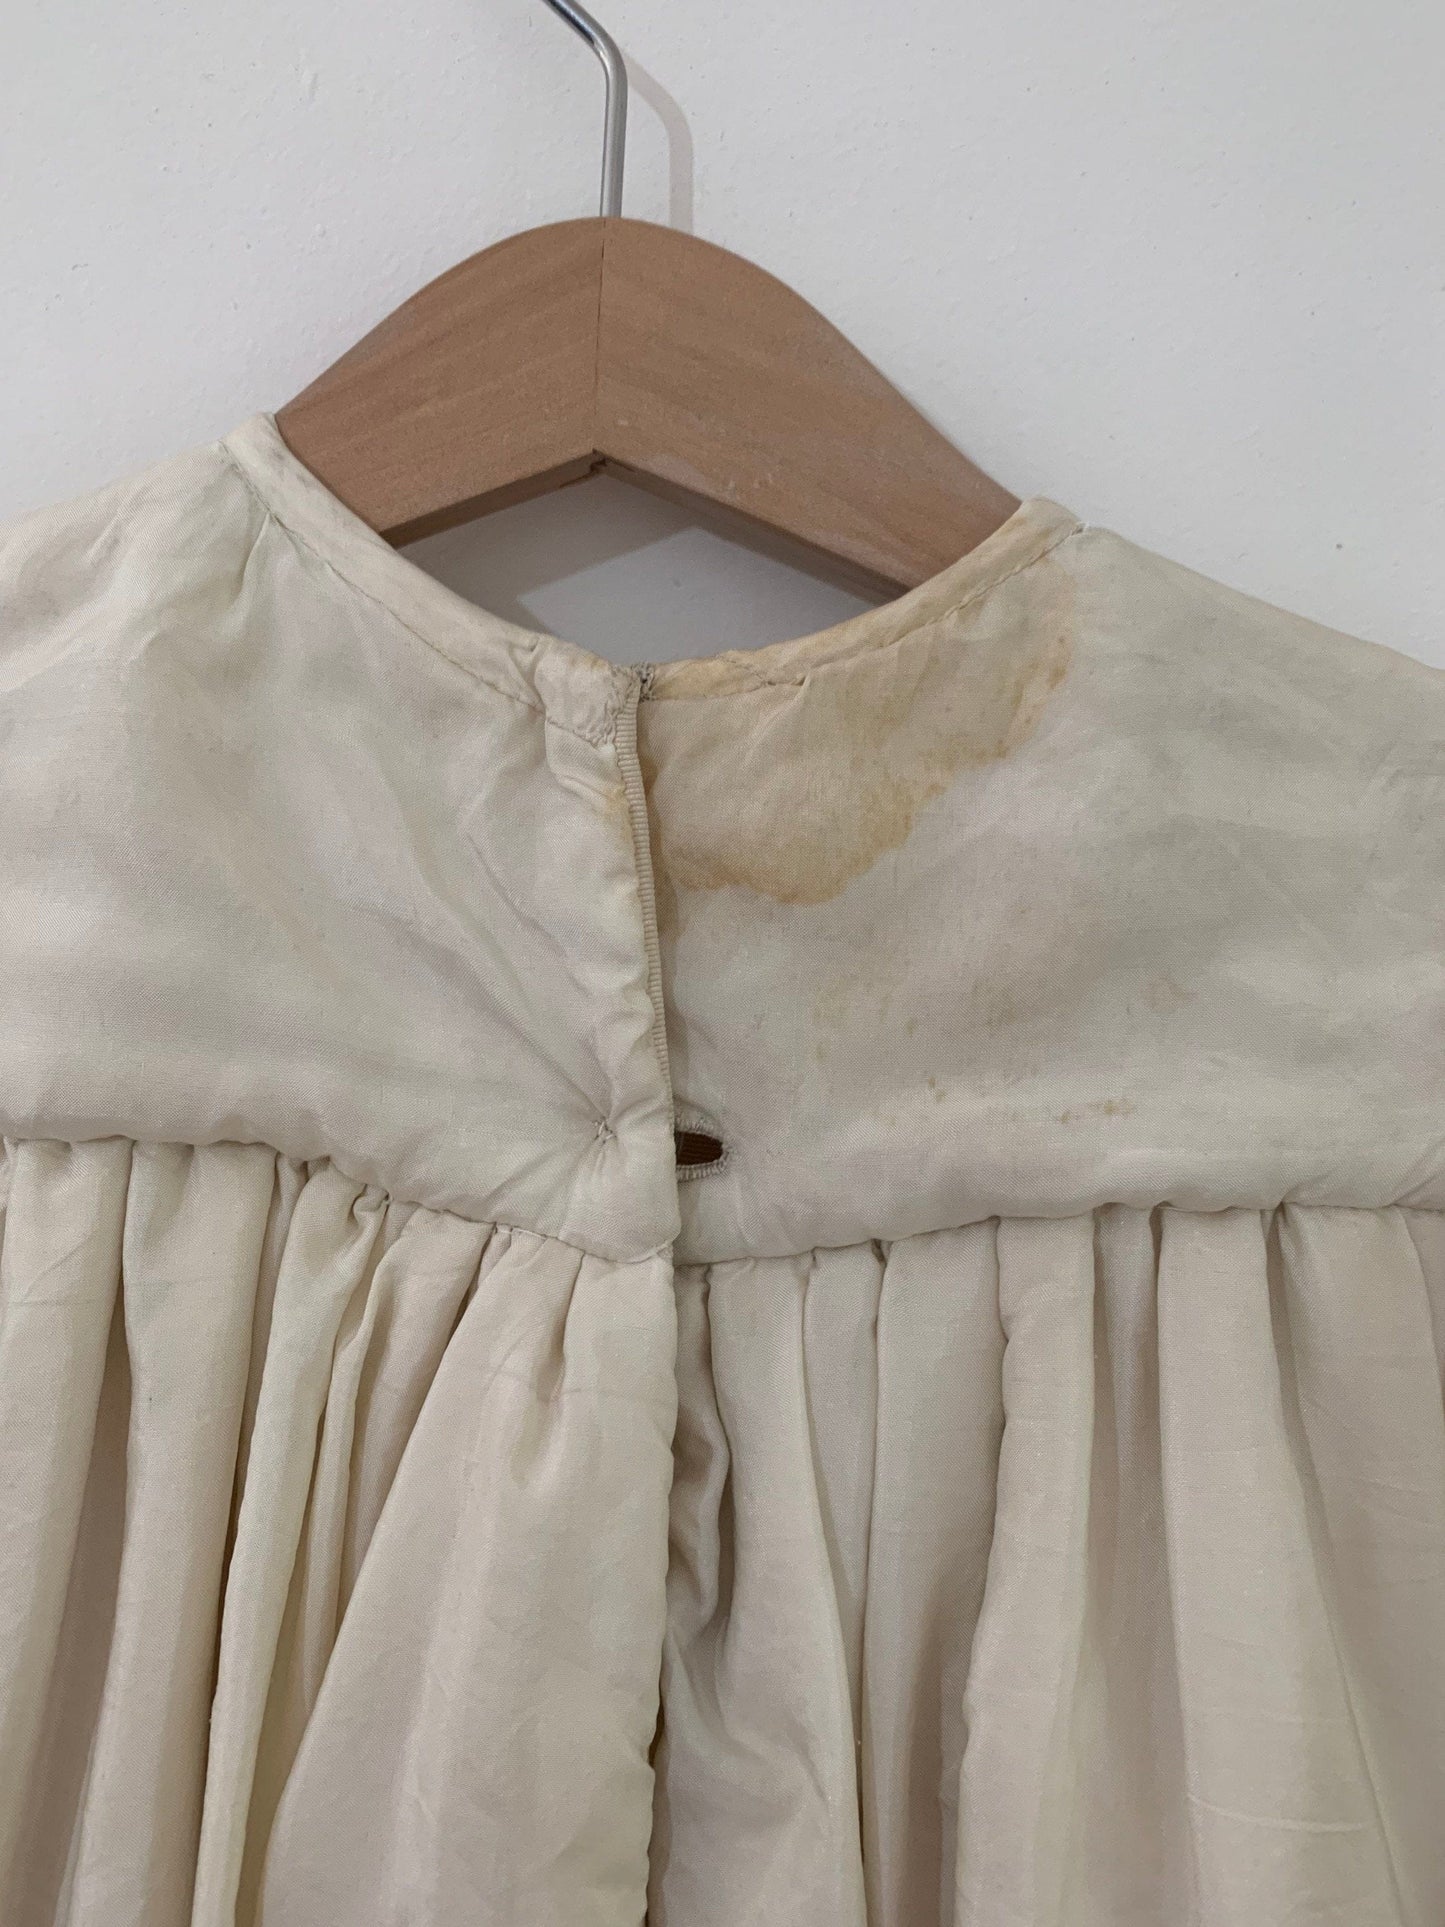 Antique Silk Christening Gown and cape, 19th Century Christening Gown, Heirloom Christening Gown, Antique Christening Cape Silk Exceptional